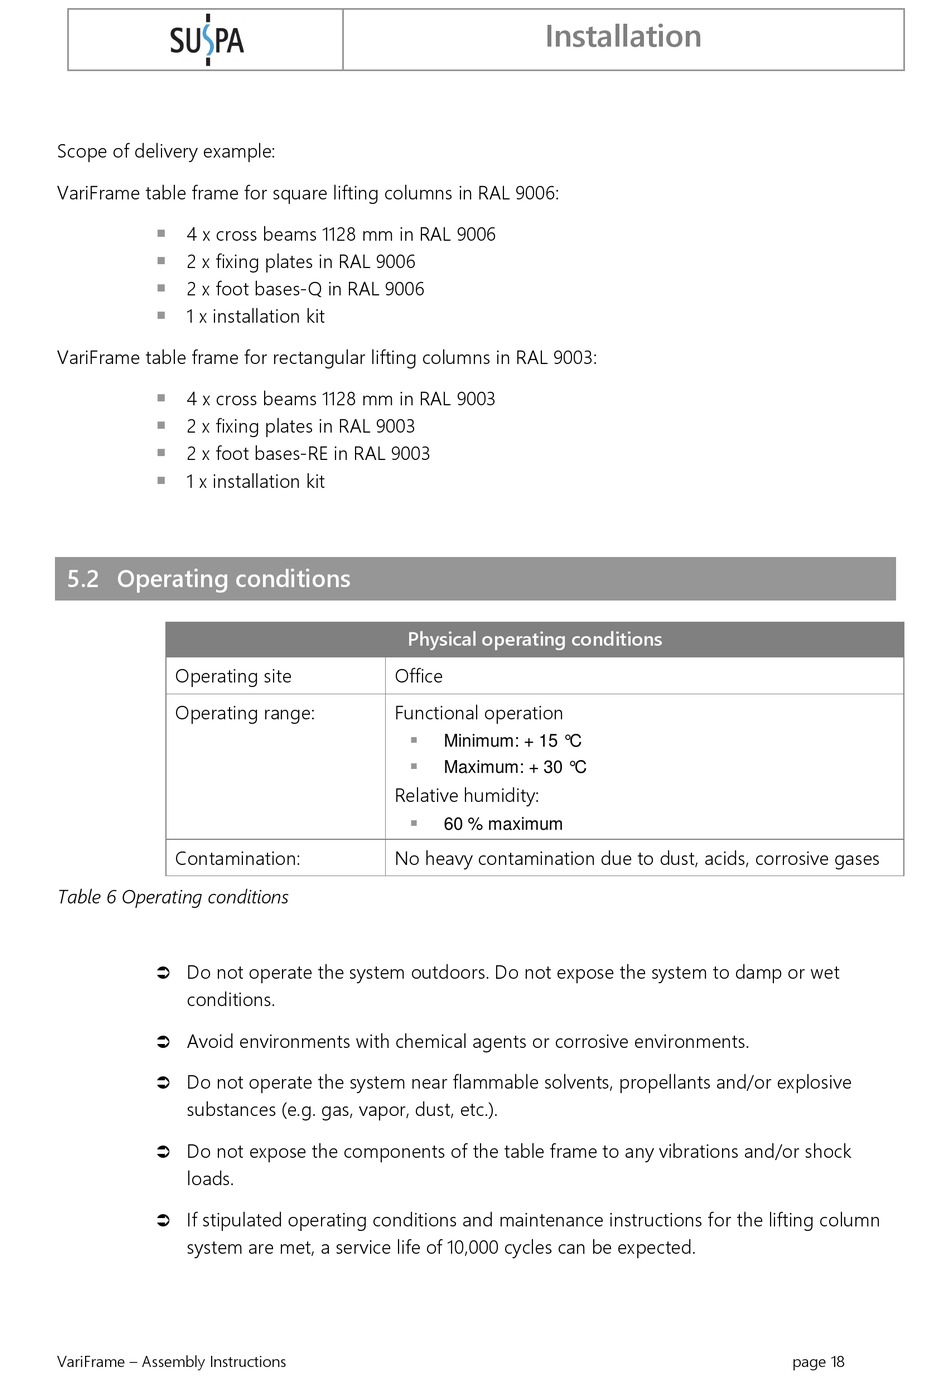 Operating Conditions - Suspa VariFrame Assembly Instructions Manual [Page  18]